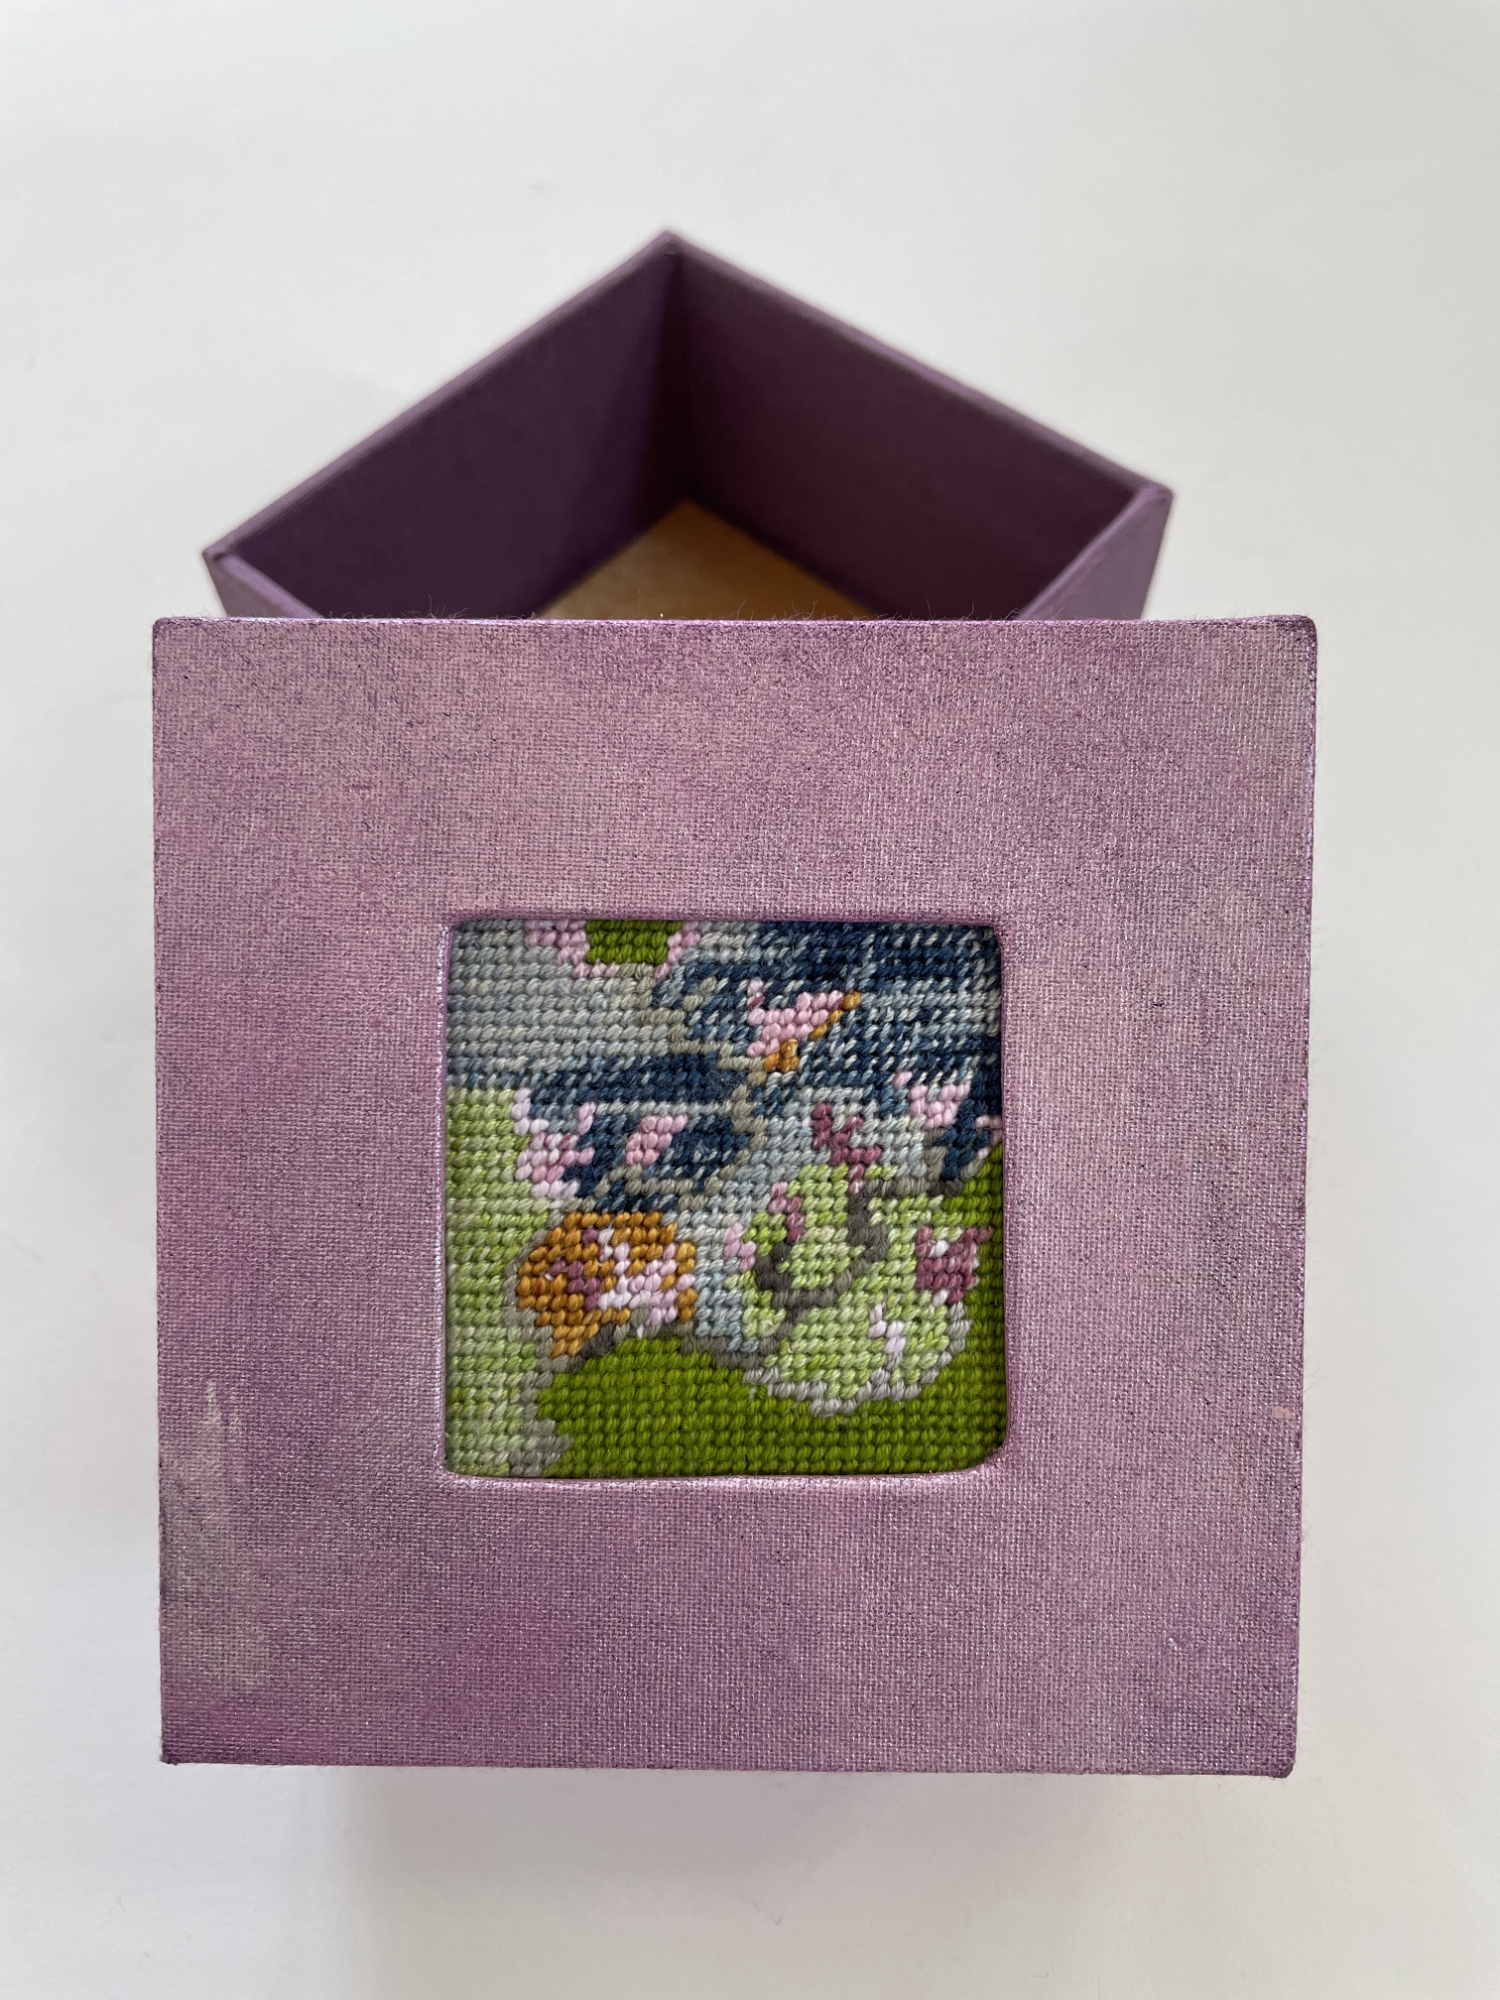 a box with an inset needlepoint of magnolia branches and blooms